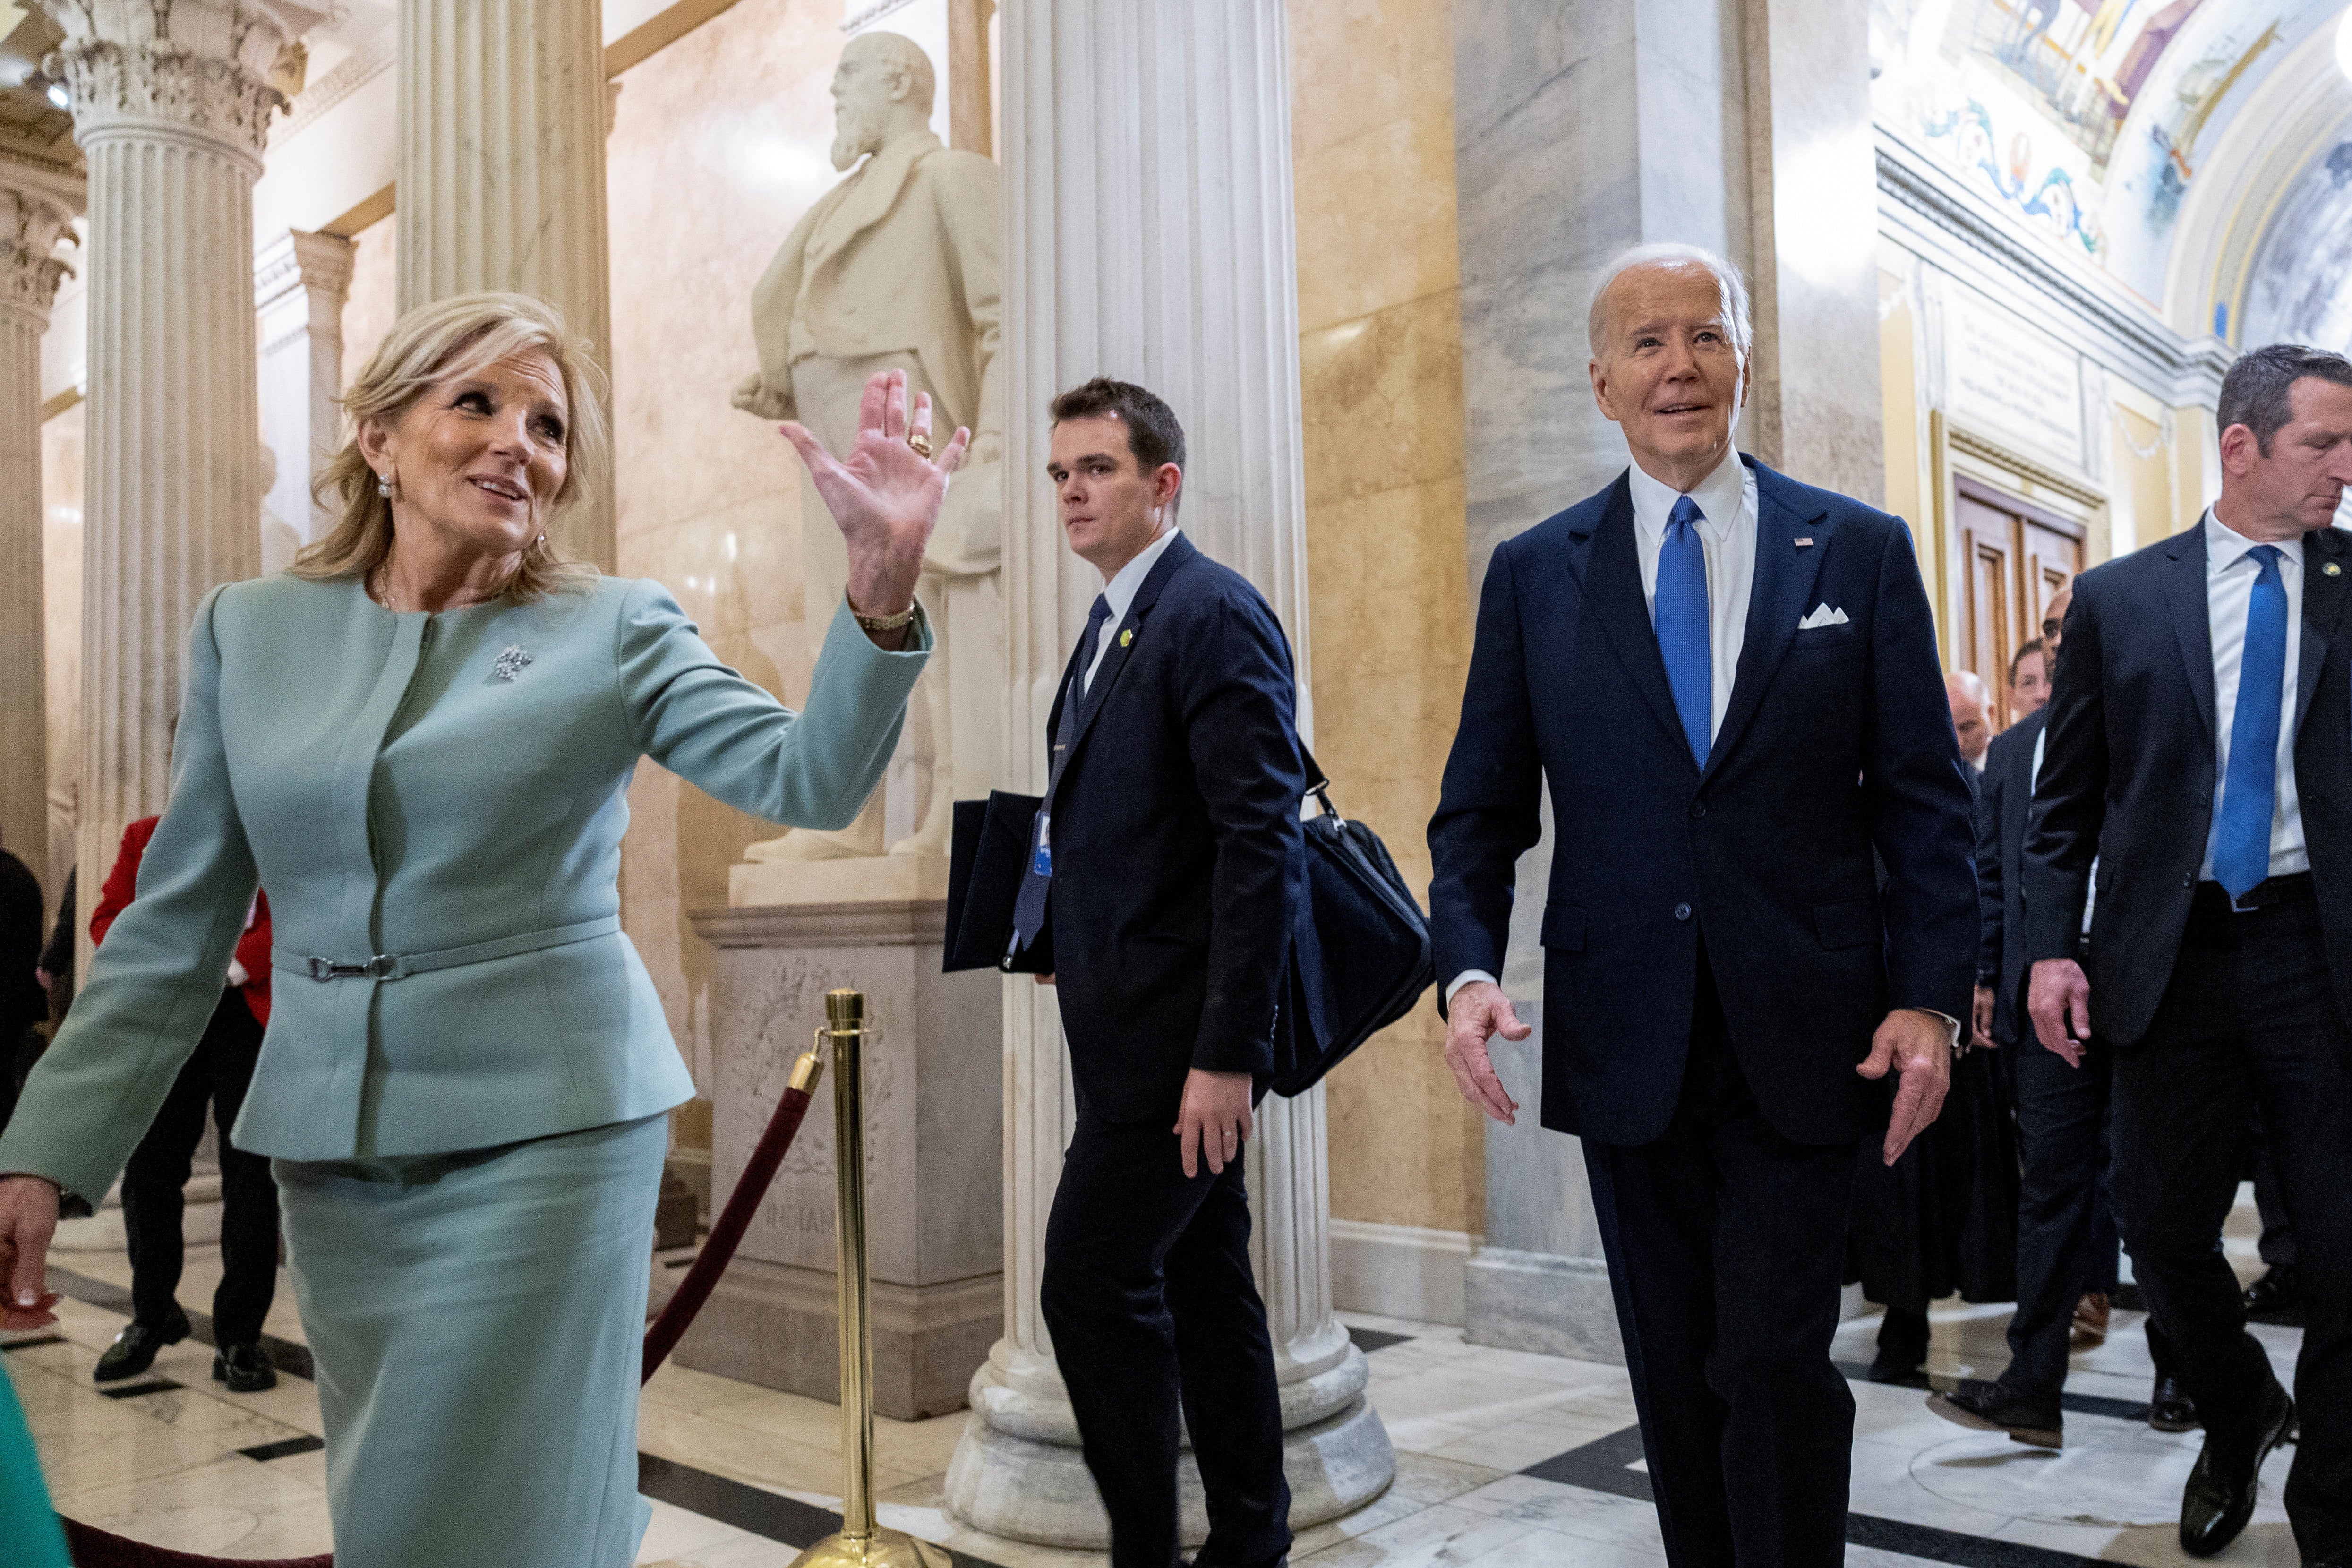 Preisdent Joe Biden and First Lady Dr Jill Biden arrive ahead of his State of the Union address